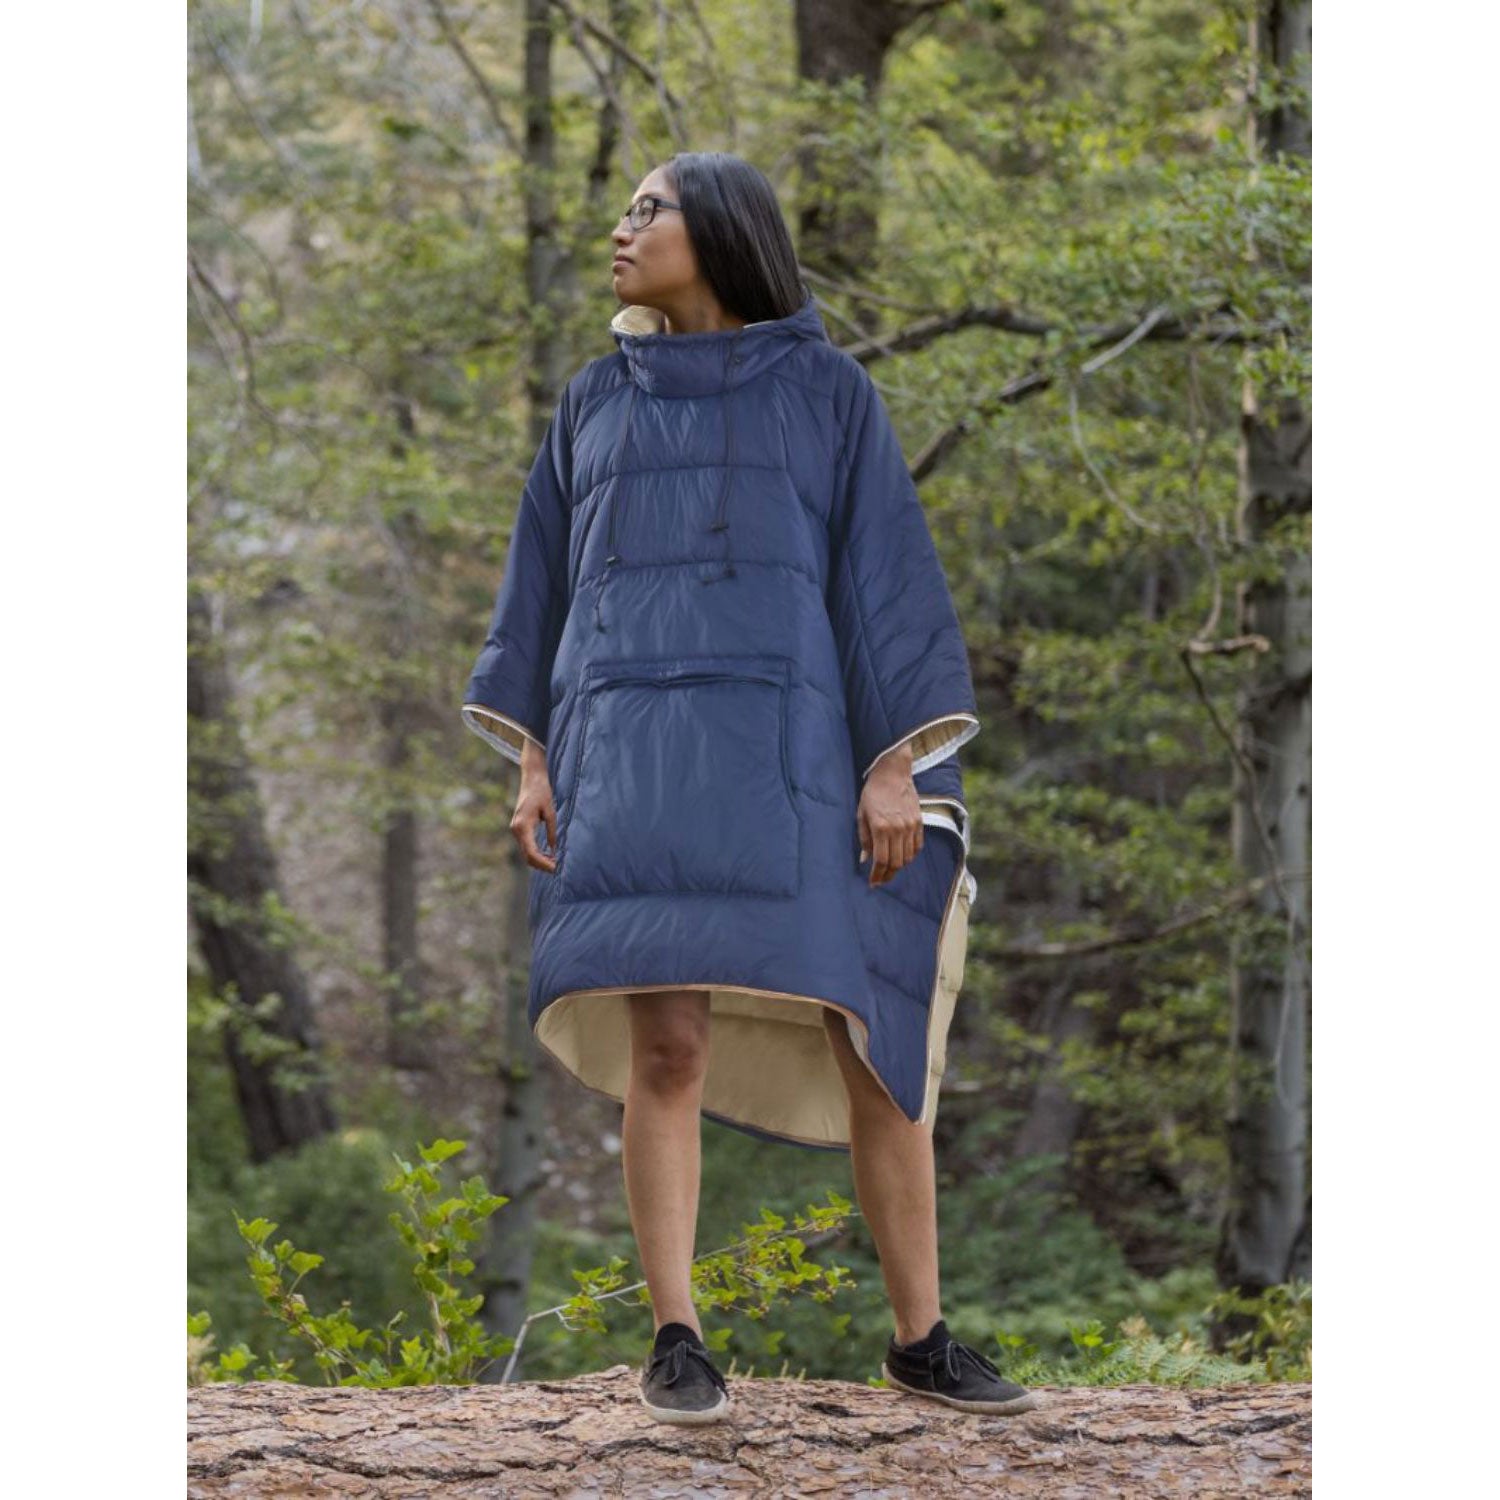 The Home Collection Great Outdoors 3 in 1 Poncho 1 Shaws Department Stores